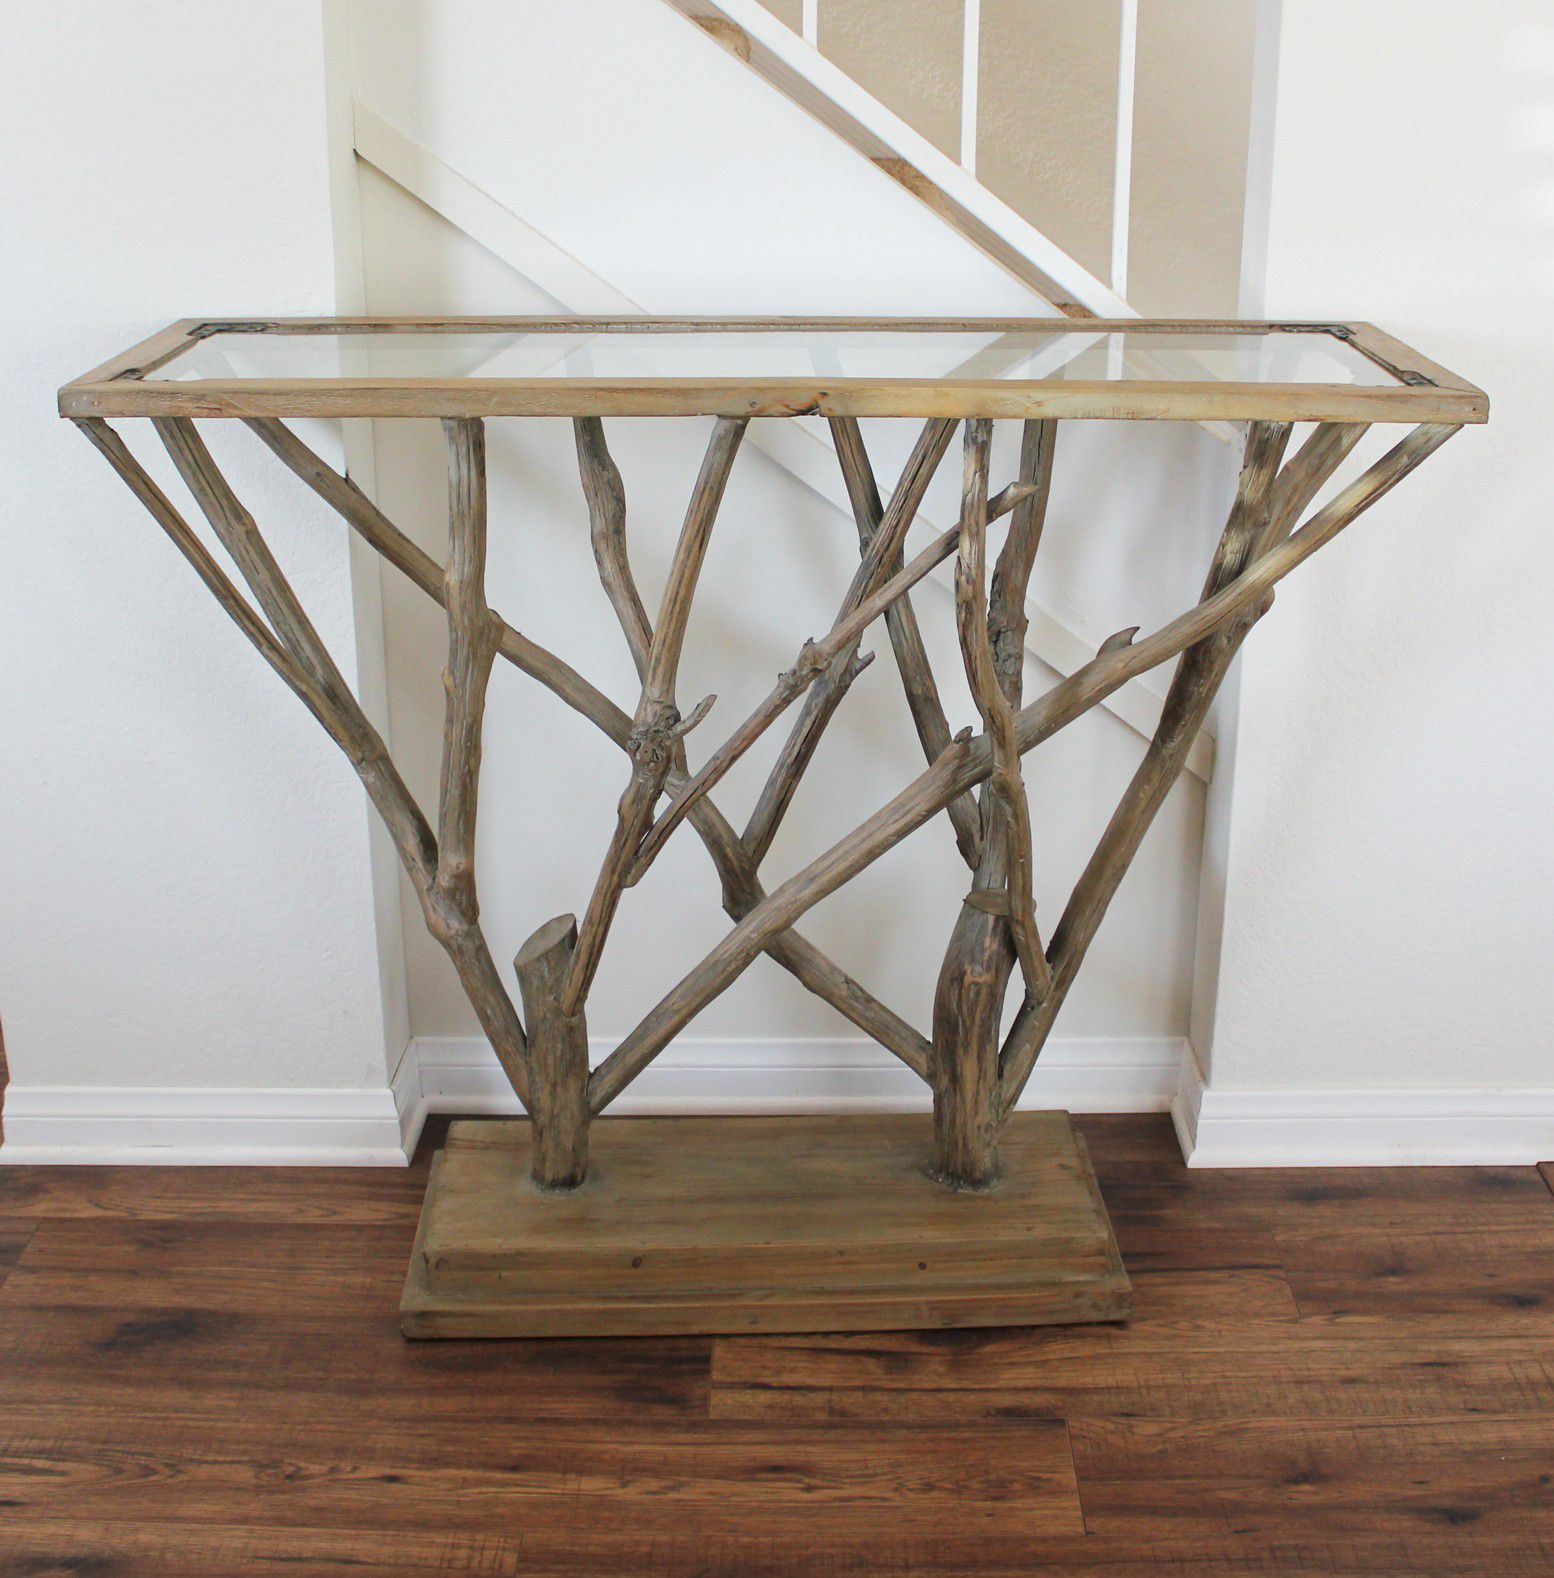 Rustic Natural Wood Tree Branch Sofa Entry Console Table with Glass Top